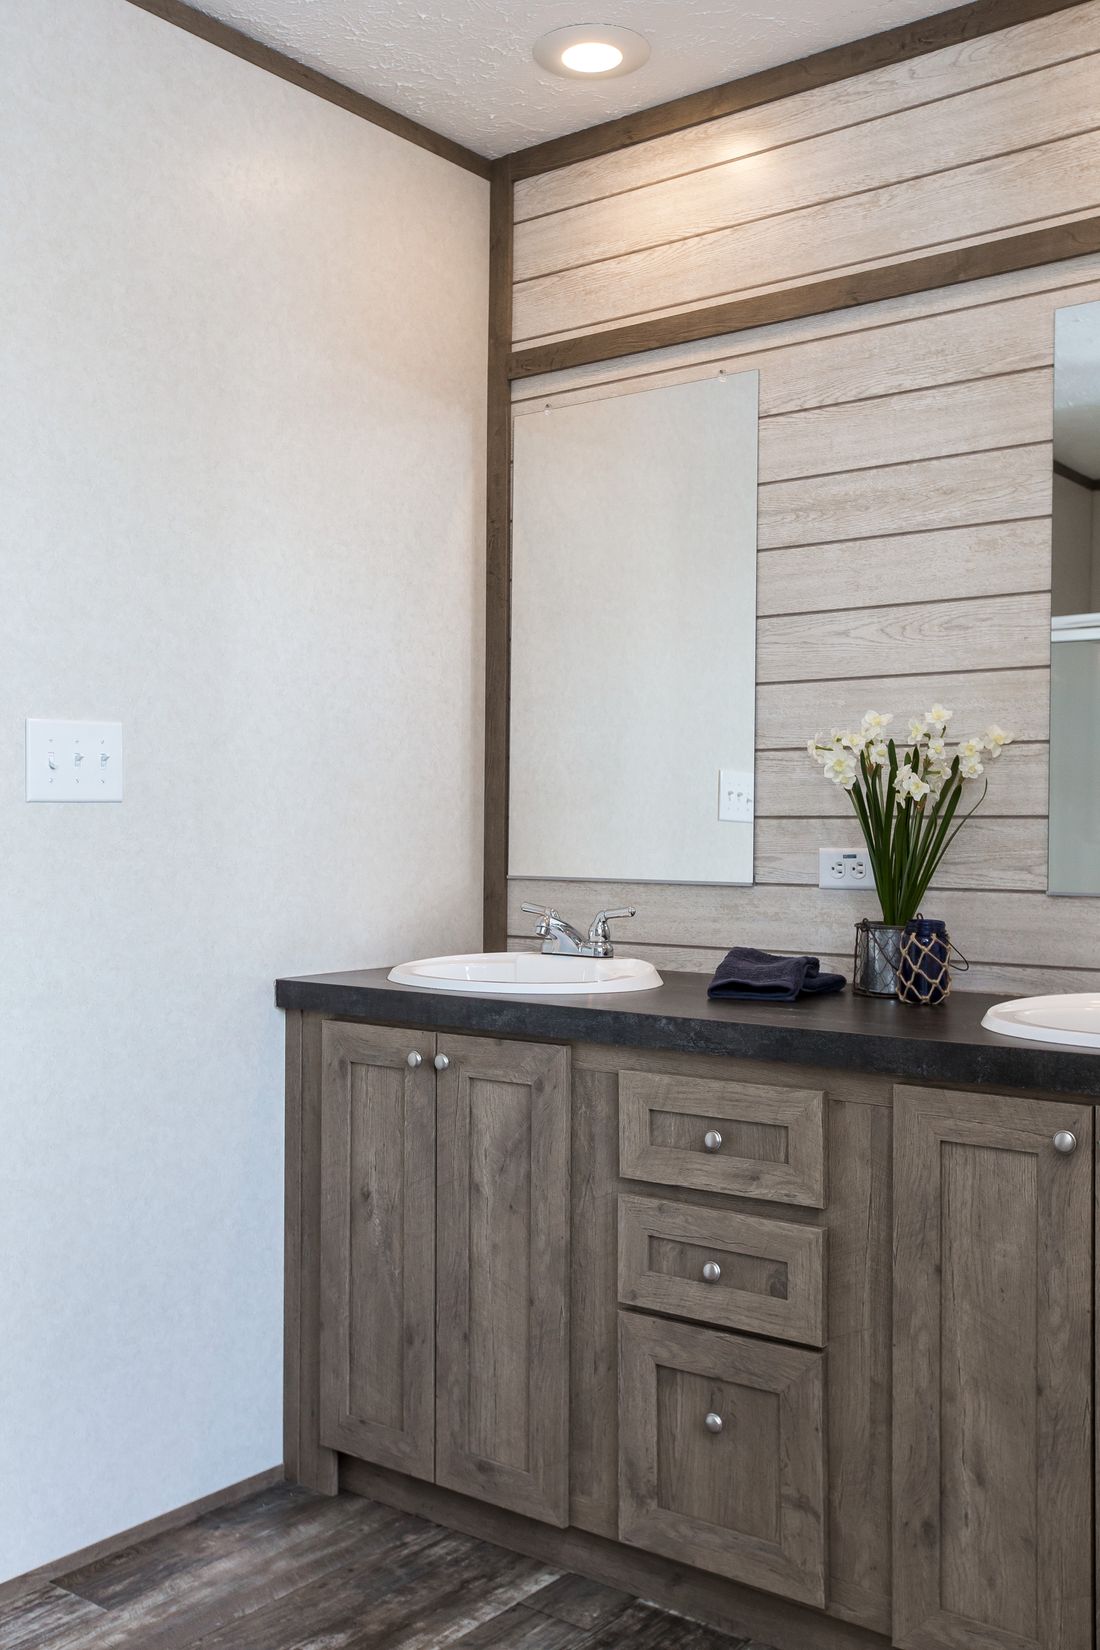 The THE BREEZE II Master Bathroom. This Manufactured Mobile Home features 4 bedrooms and 2 baths.